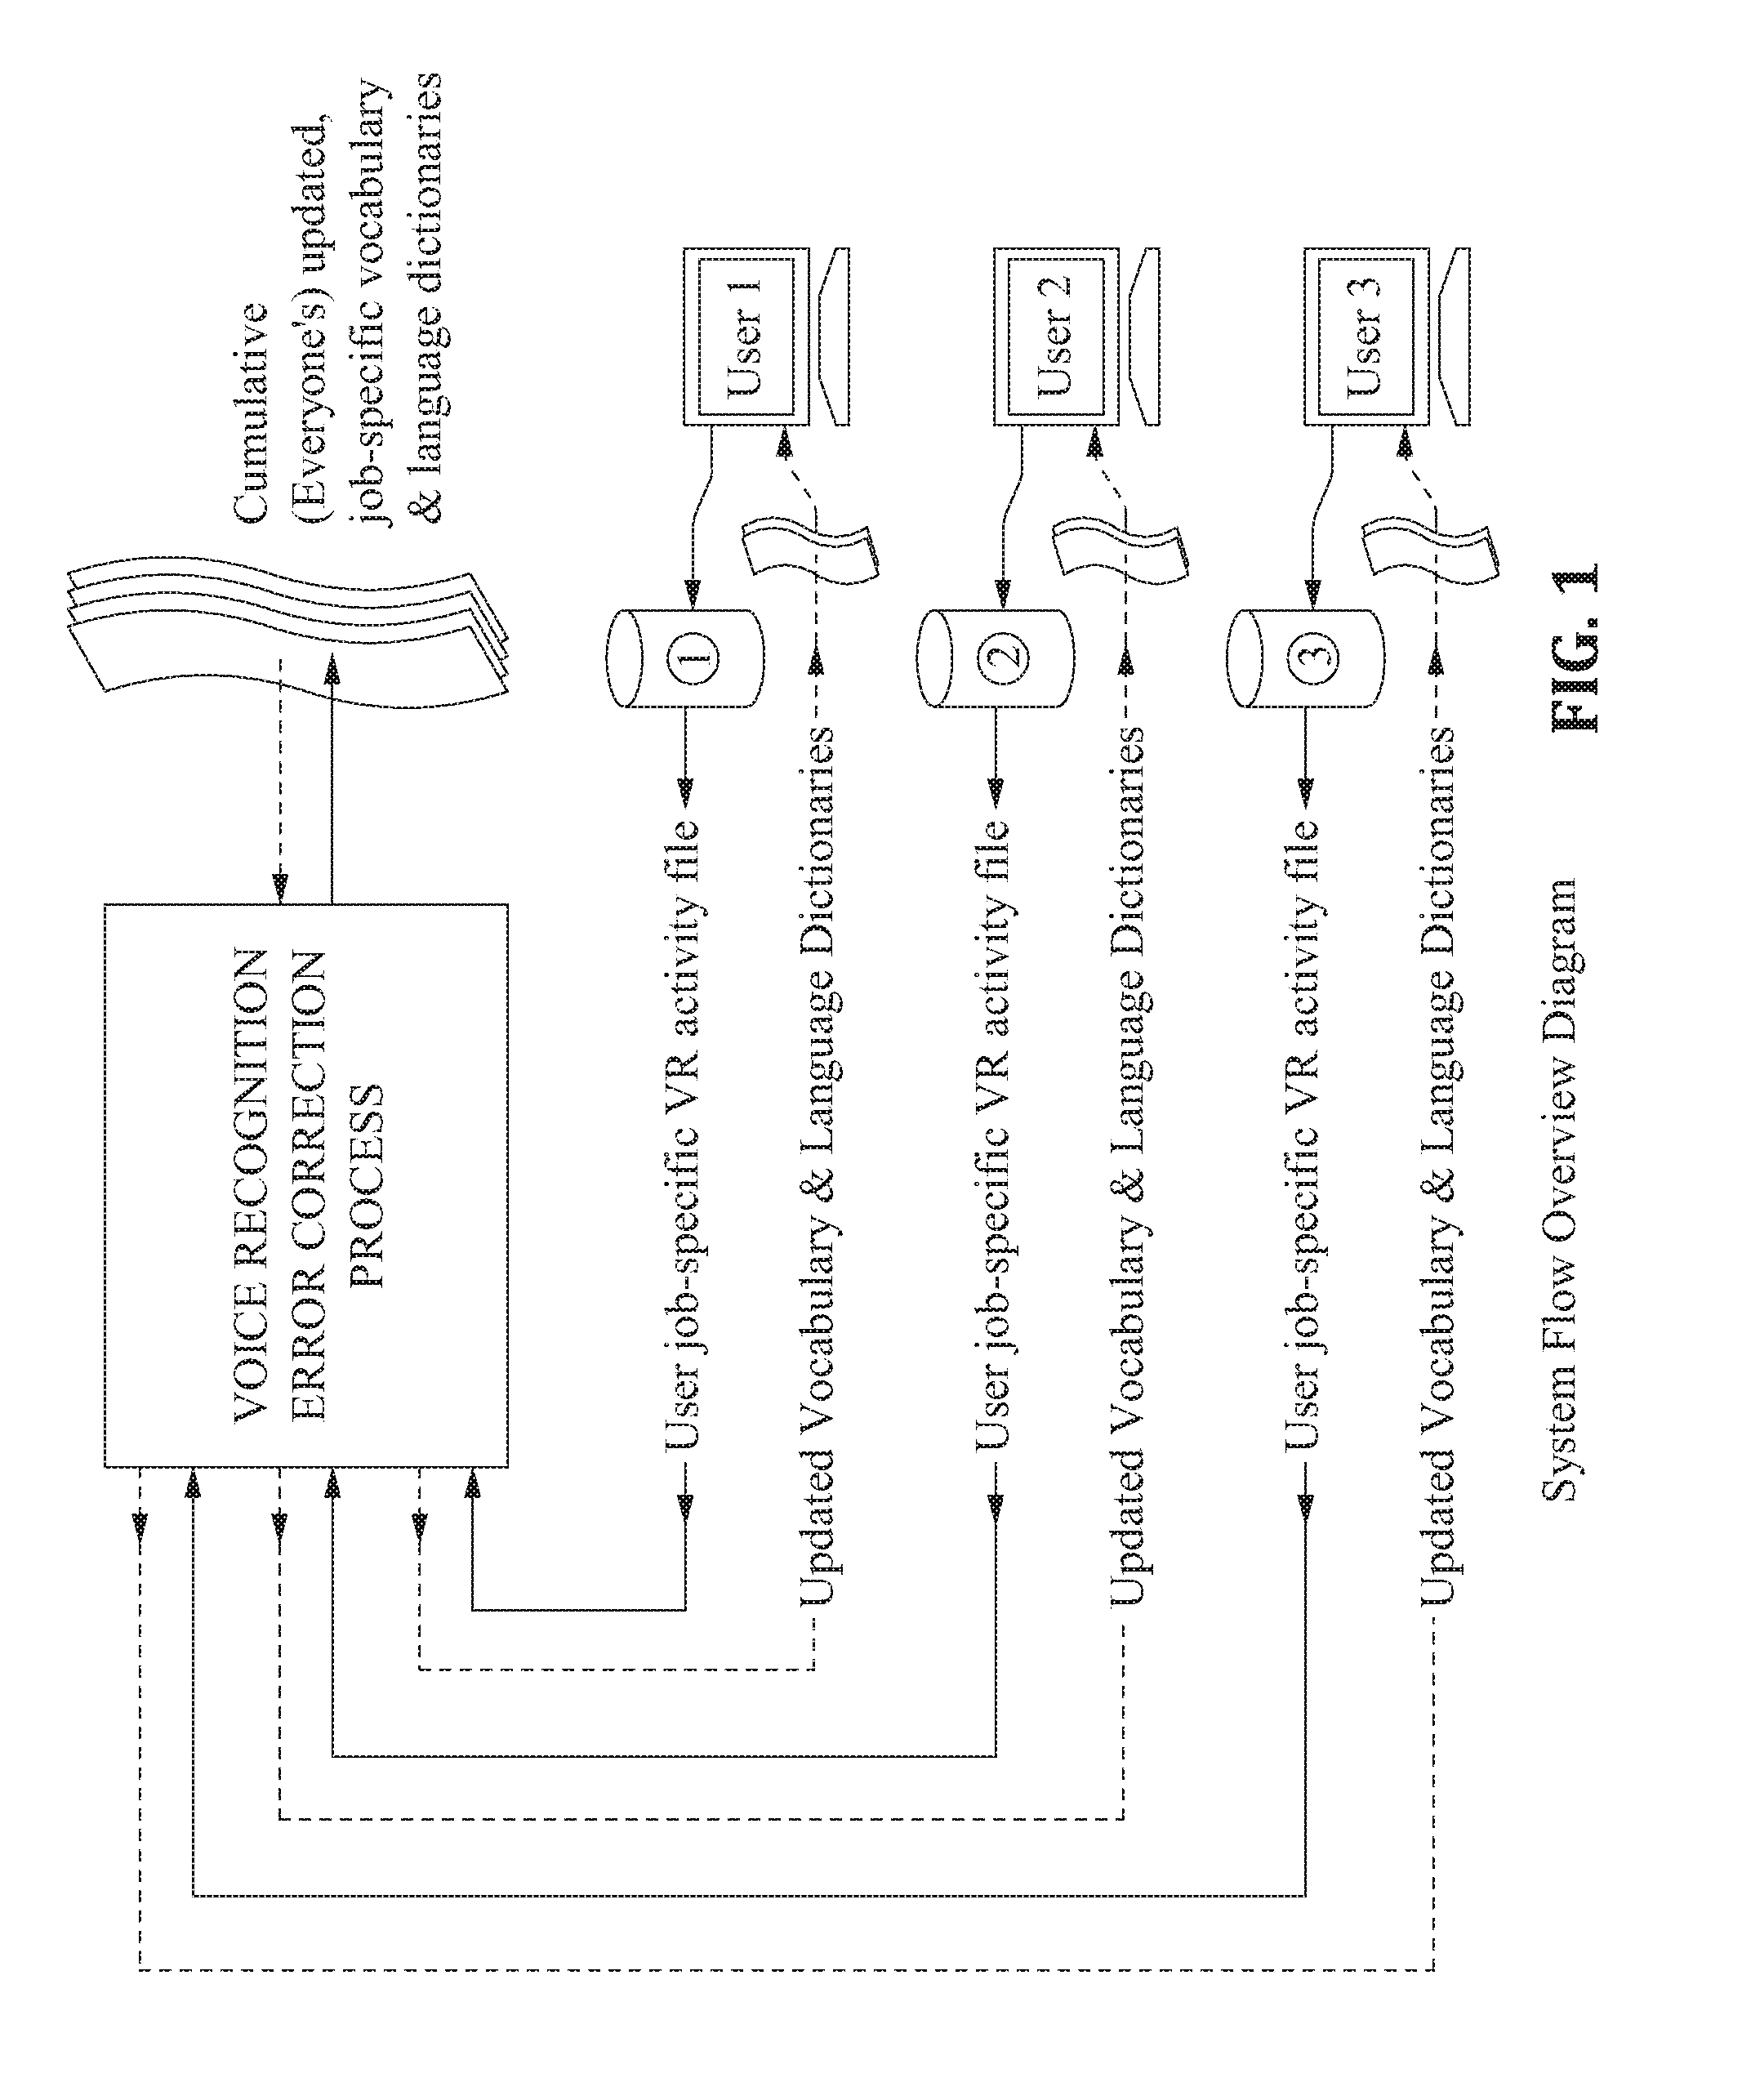 Method for Substantial Ongoing Cumulative Voice Recognition Error Reduction